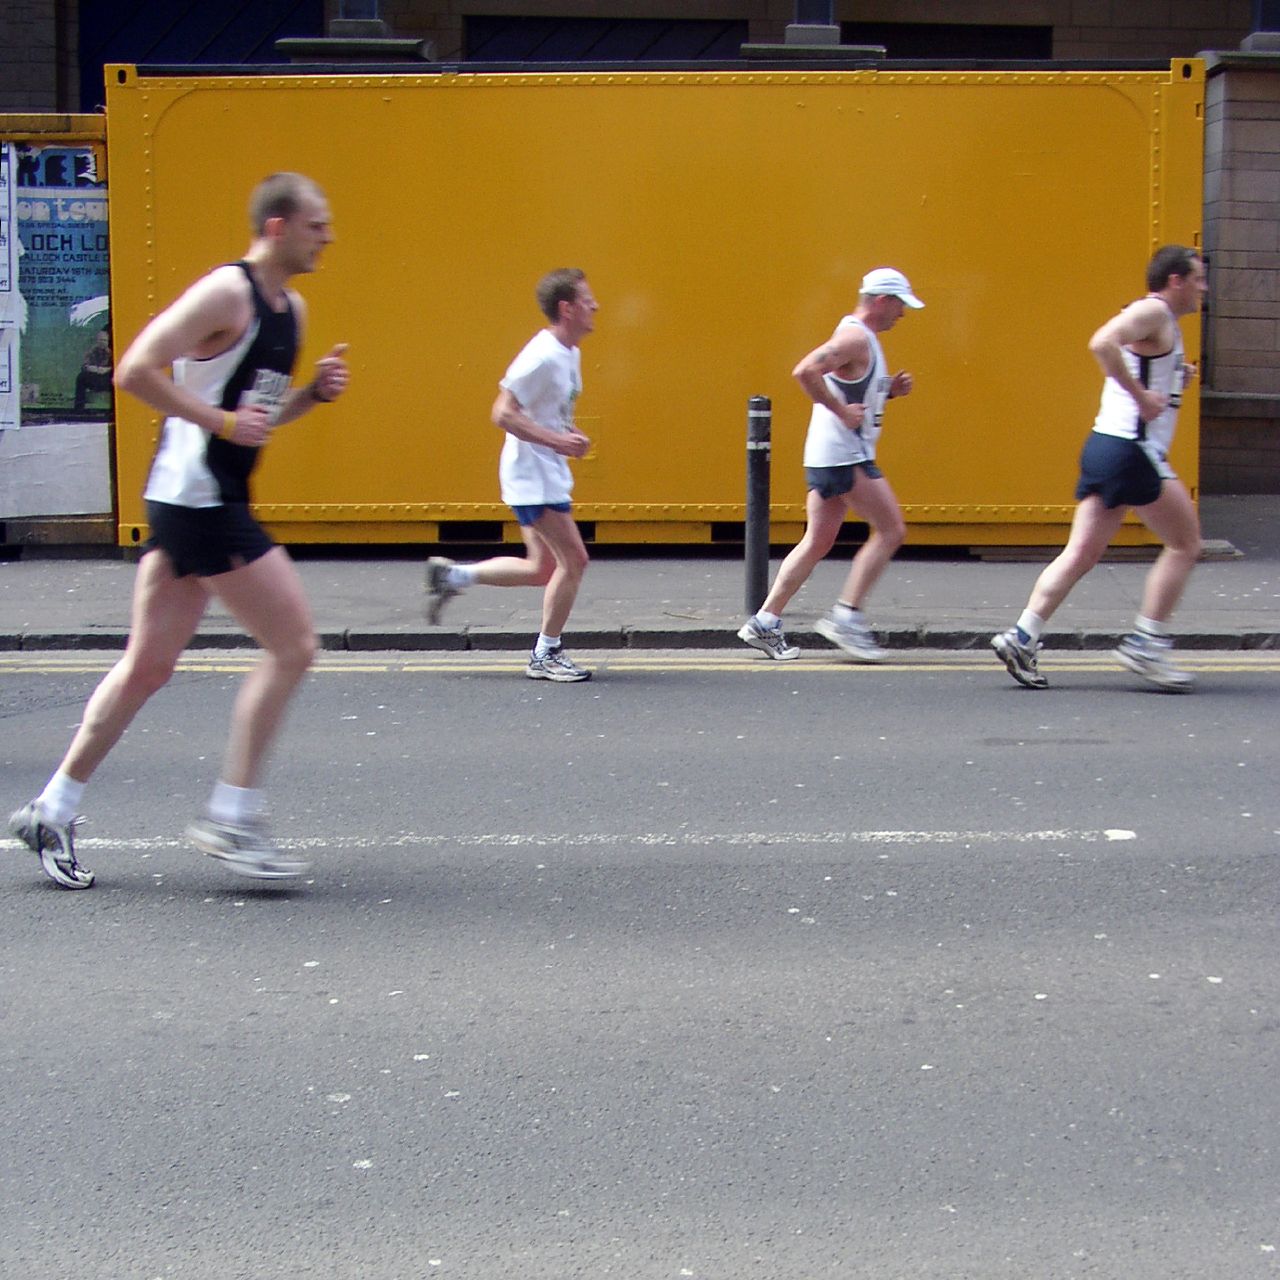 a line of people running together on a street